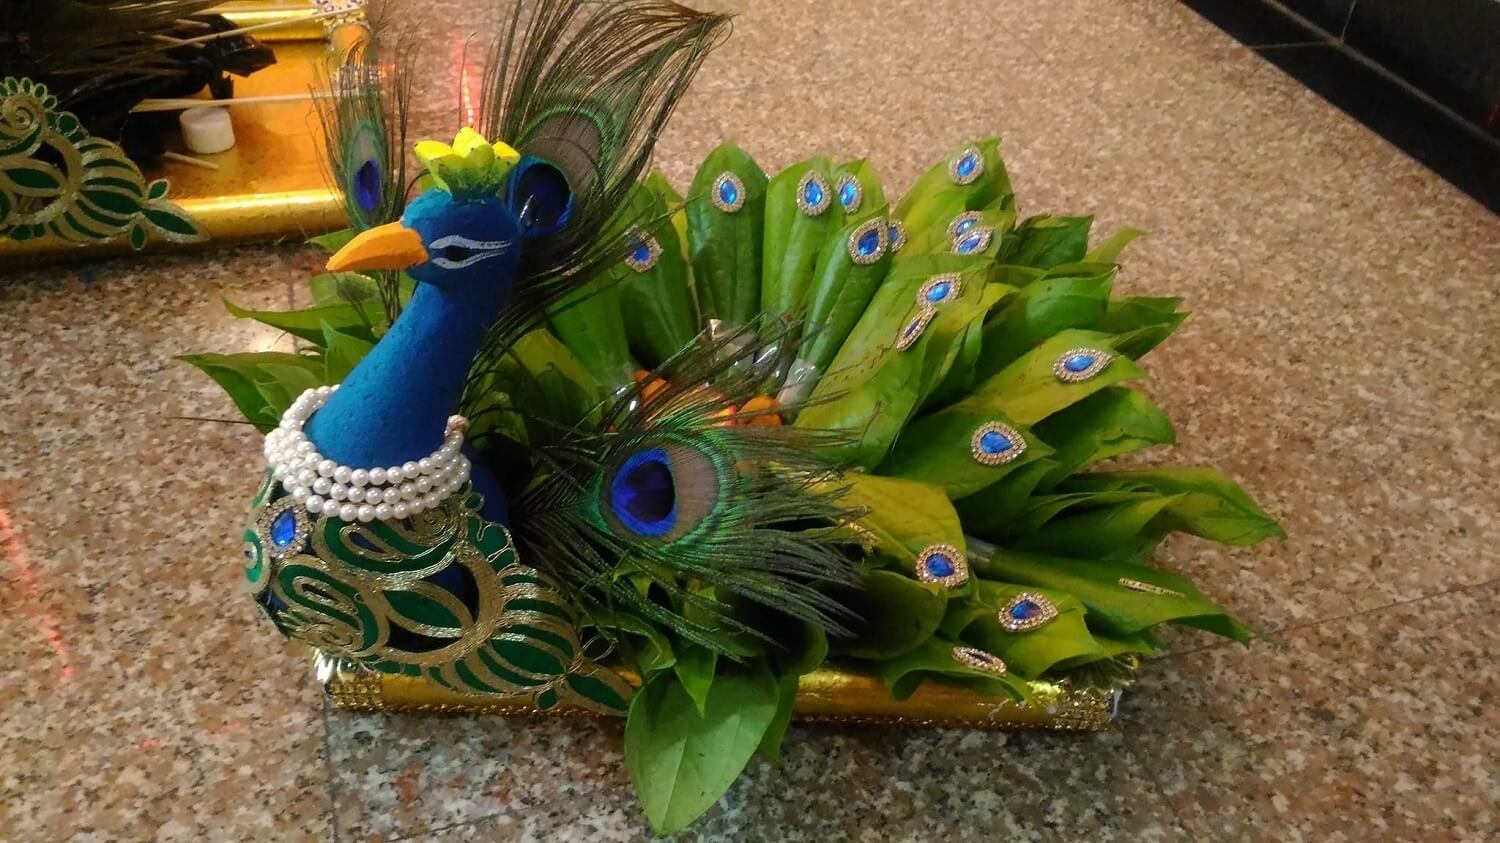 Magnificent Peacock Decor Ideas For Your Wedding